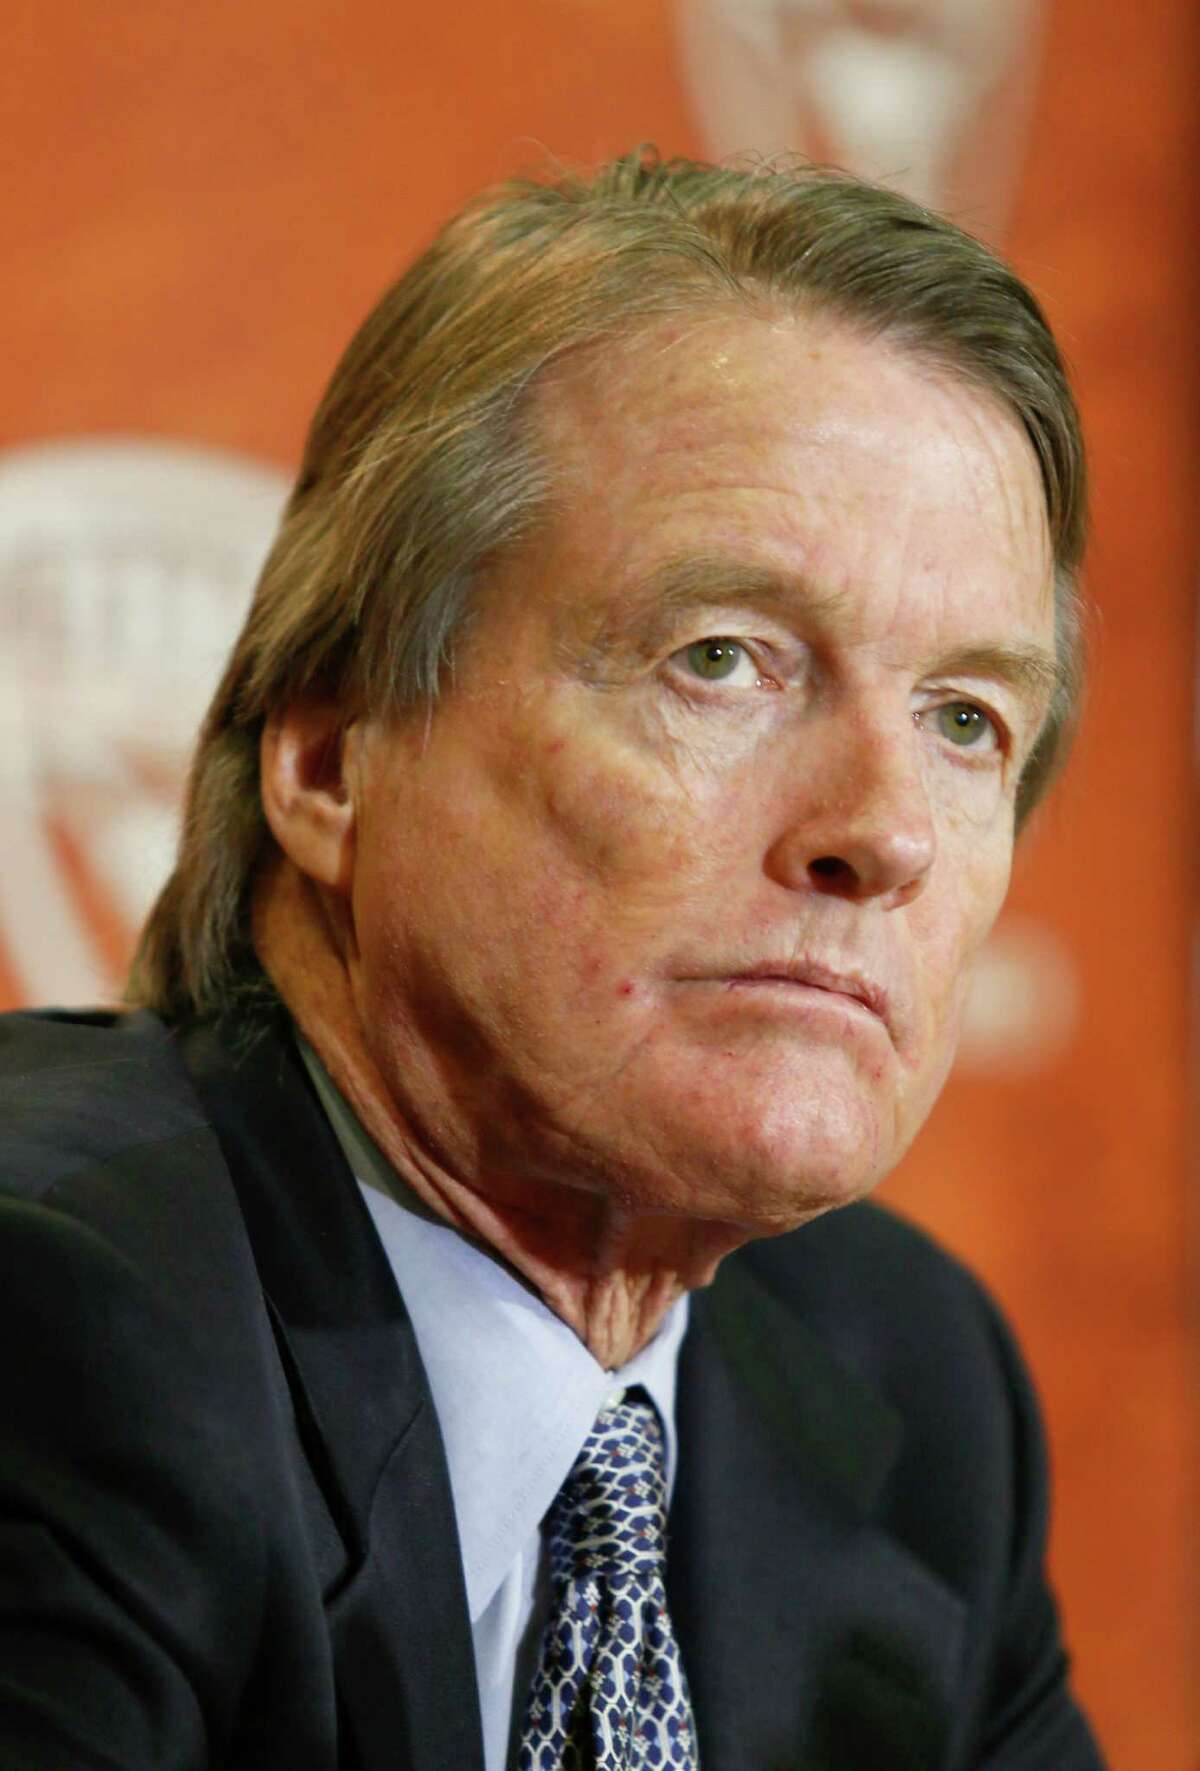 University of Texas president Bill Powers has agreed to resign.